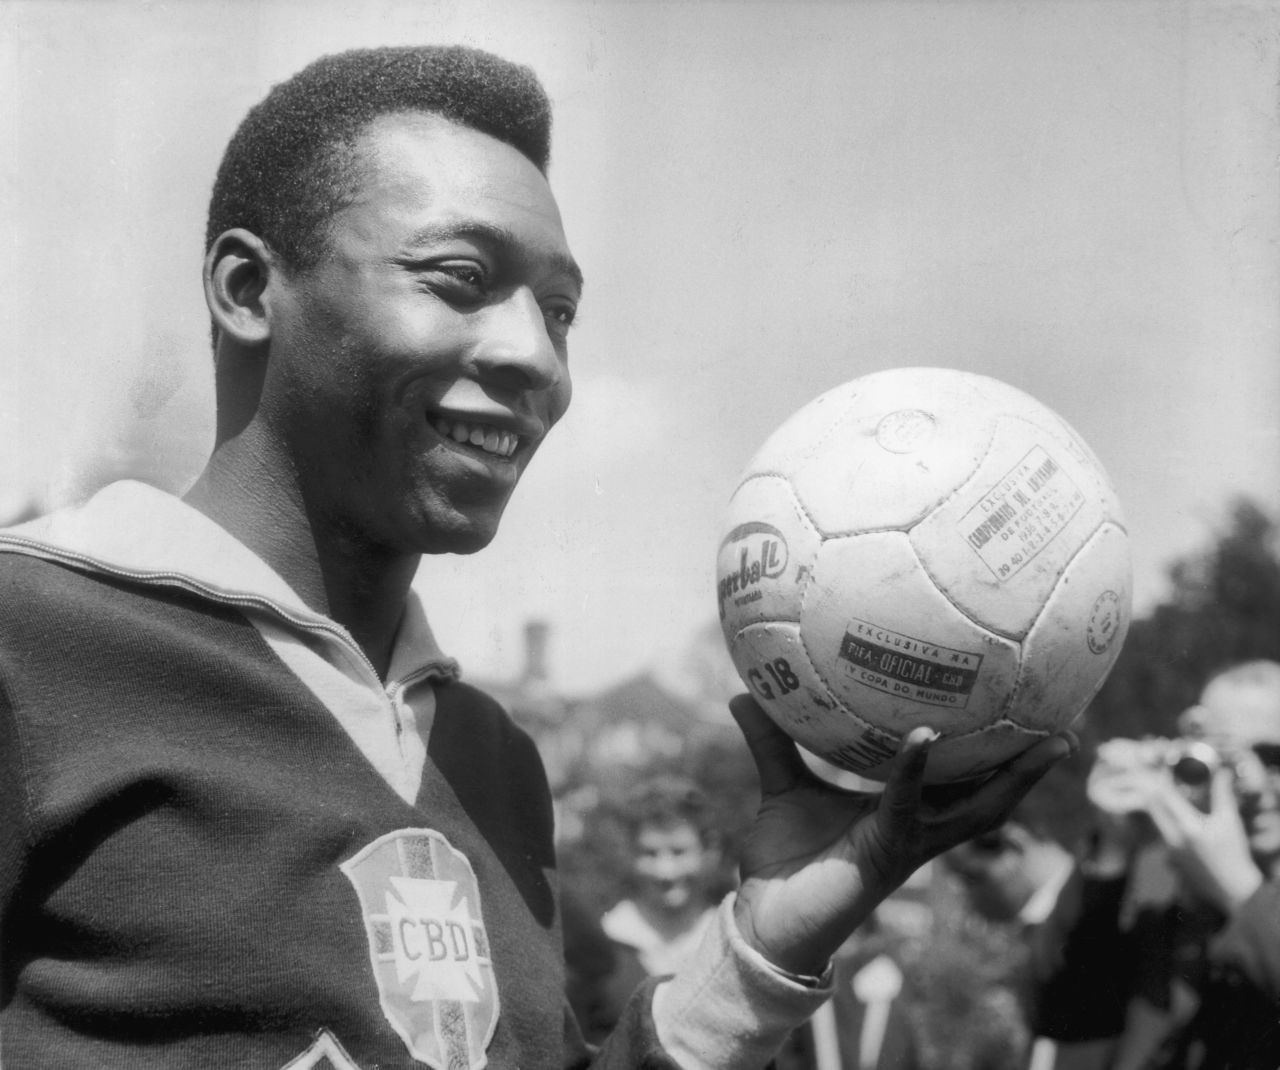 Neymar has drawn comparisons with Pele, who also came through the Santos youth academy and is widely regarded as one of the greatest footballers of all time. Pele won two Copa Libertadores with Santos and the World Cup with Brazil on three occasions.